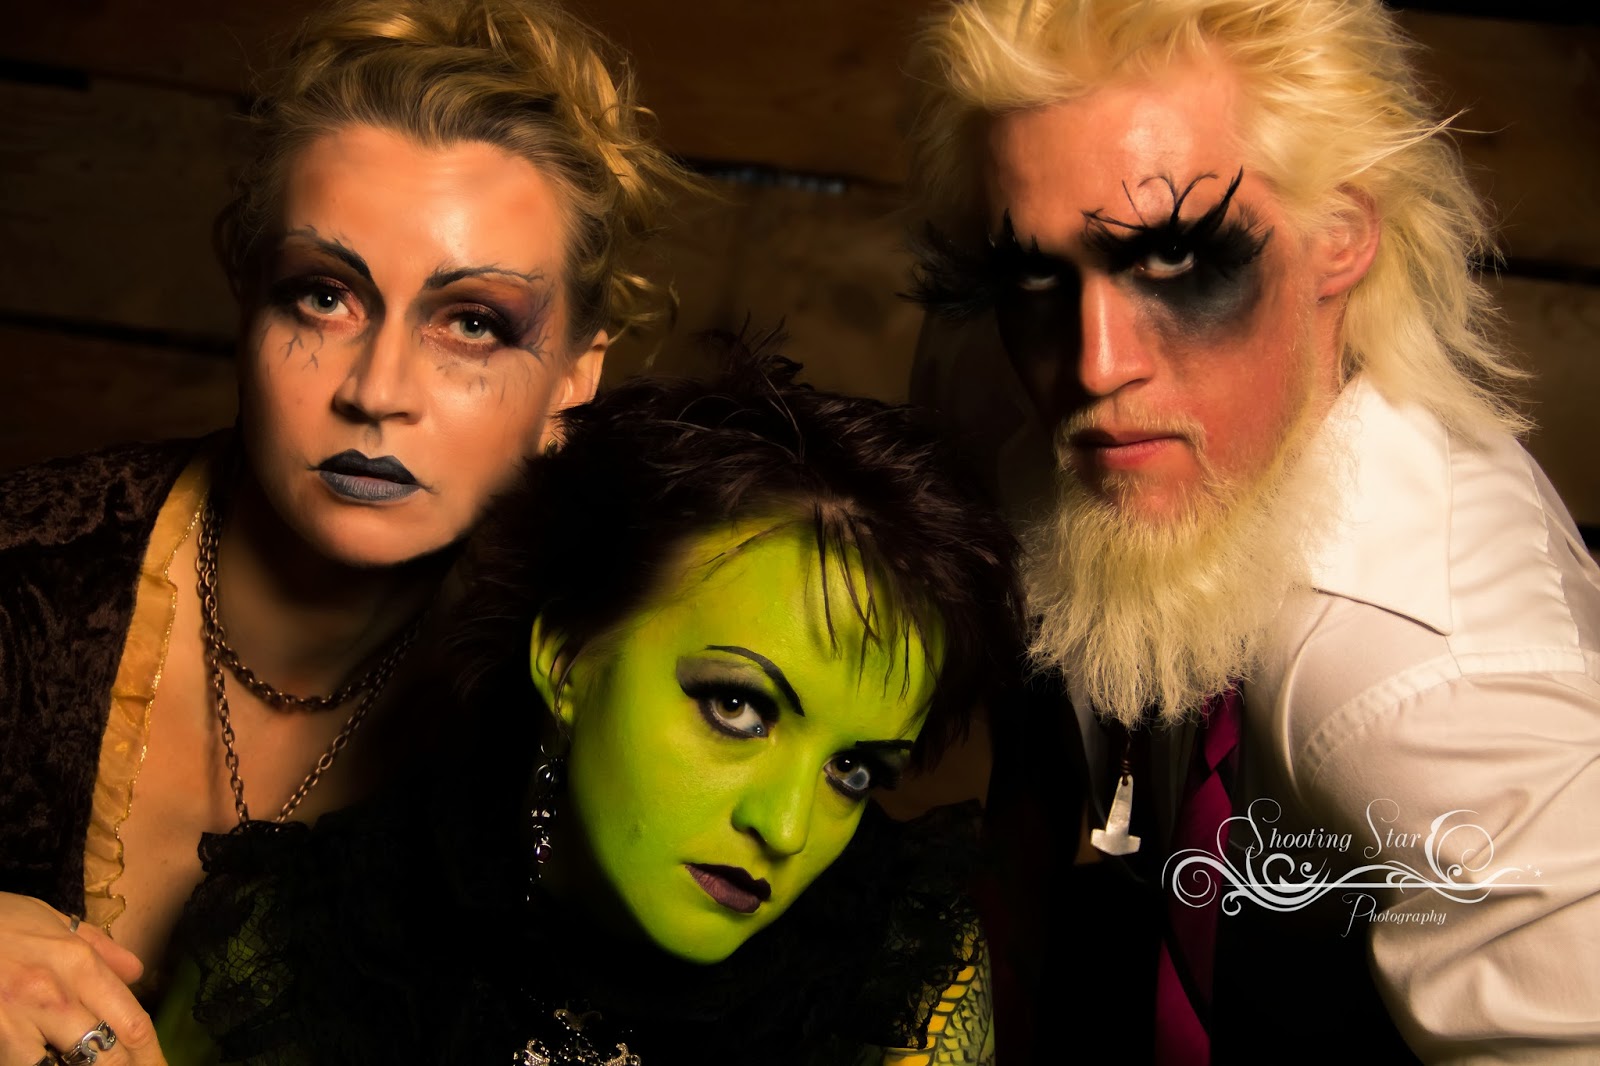 Shooting Star Photography by Mandy: HaLlOwEEn HiGh FaShiOn ConCePt ...